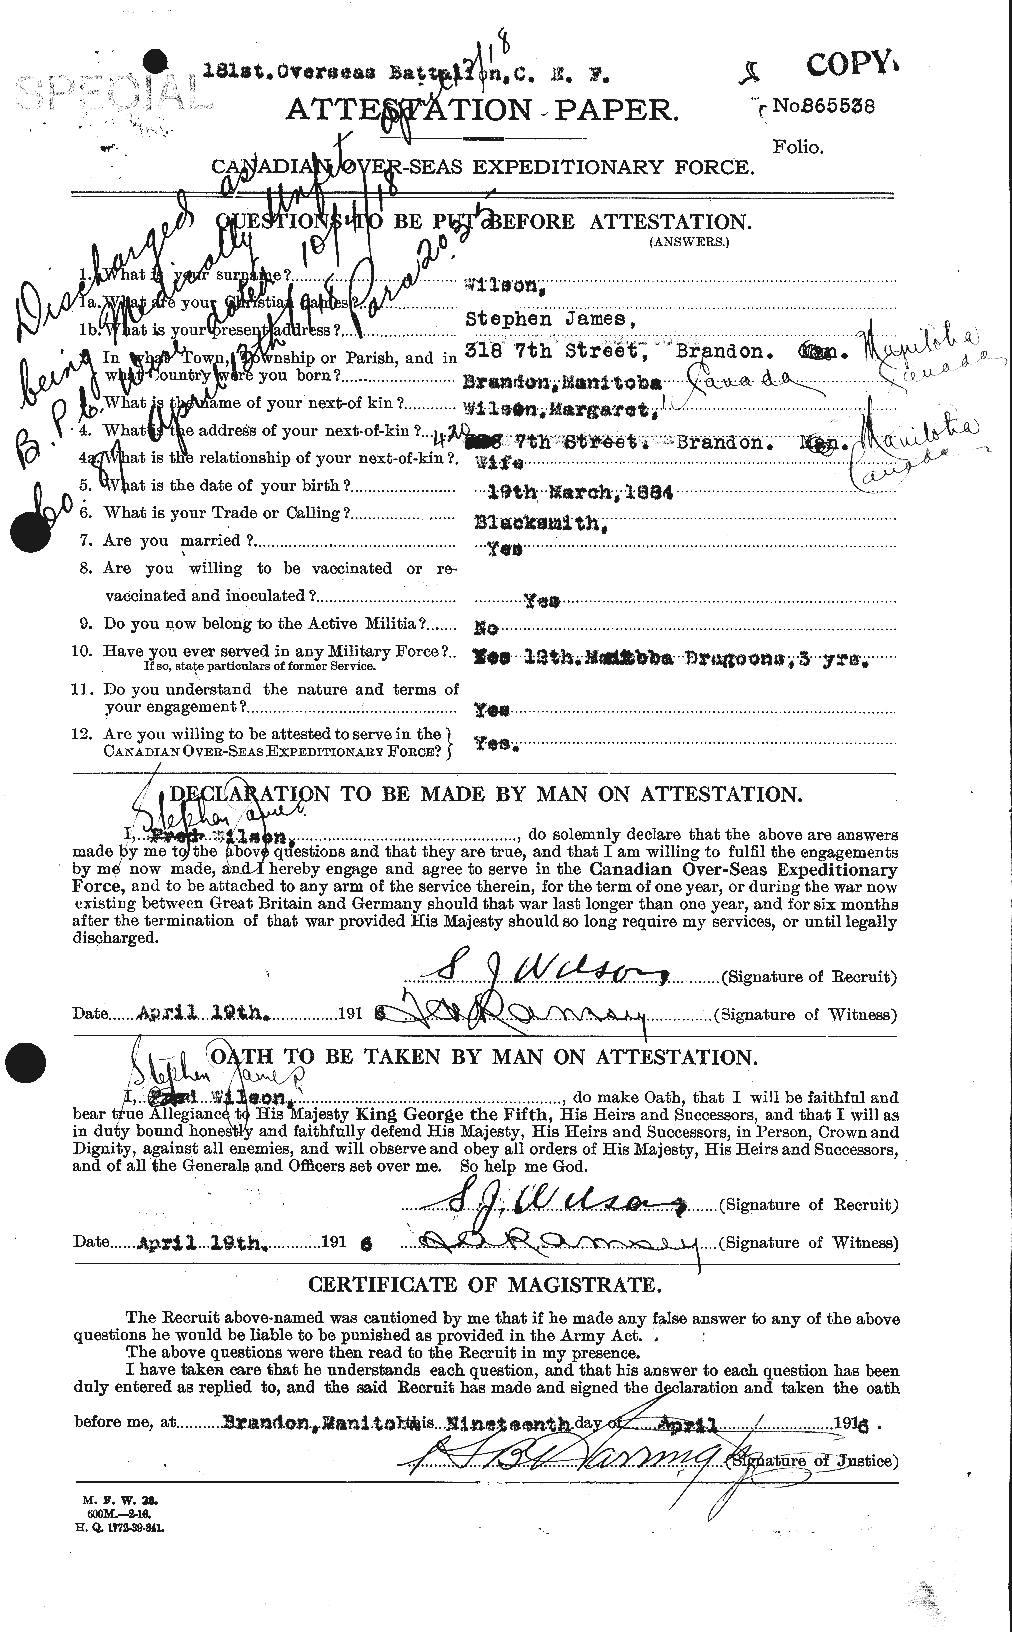 Personnel Records of the First World War - CEF 681149a